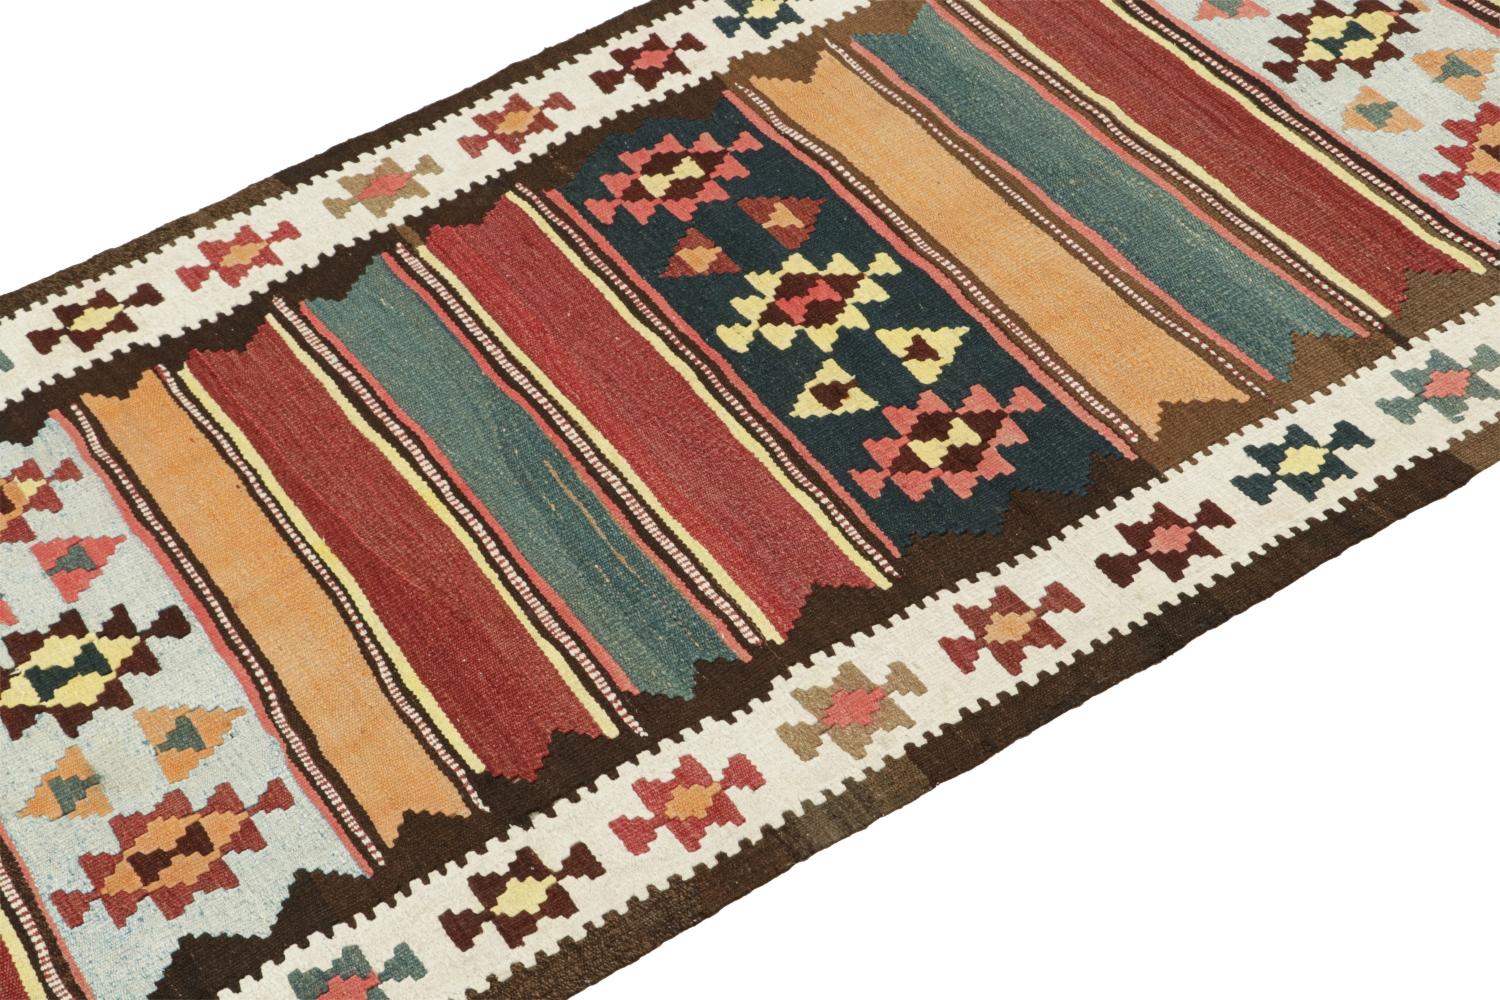 This vintage 4x10 Persian Kilim is a midcentury tribal rug that we believe originates from the Shahsavan tribe. 

On the Design:

Handwoven in wool circa 1950-1960, its design enjoys a complementary play of stripes & tribal geometric patterns in